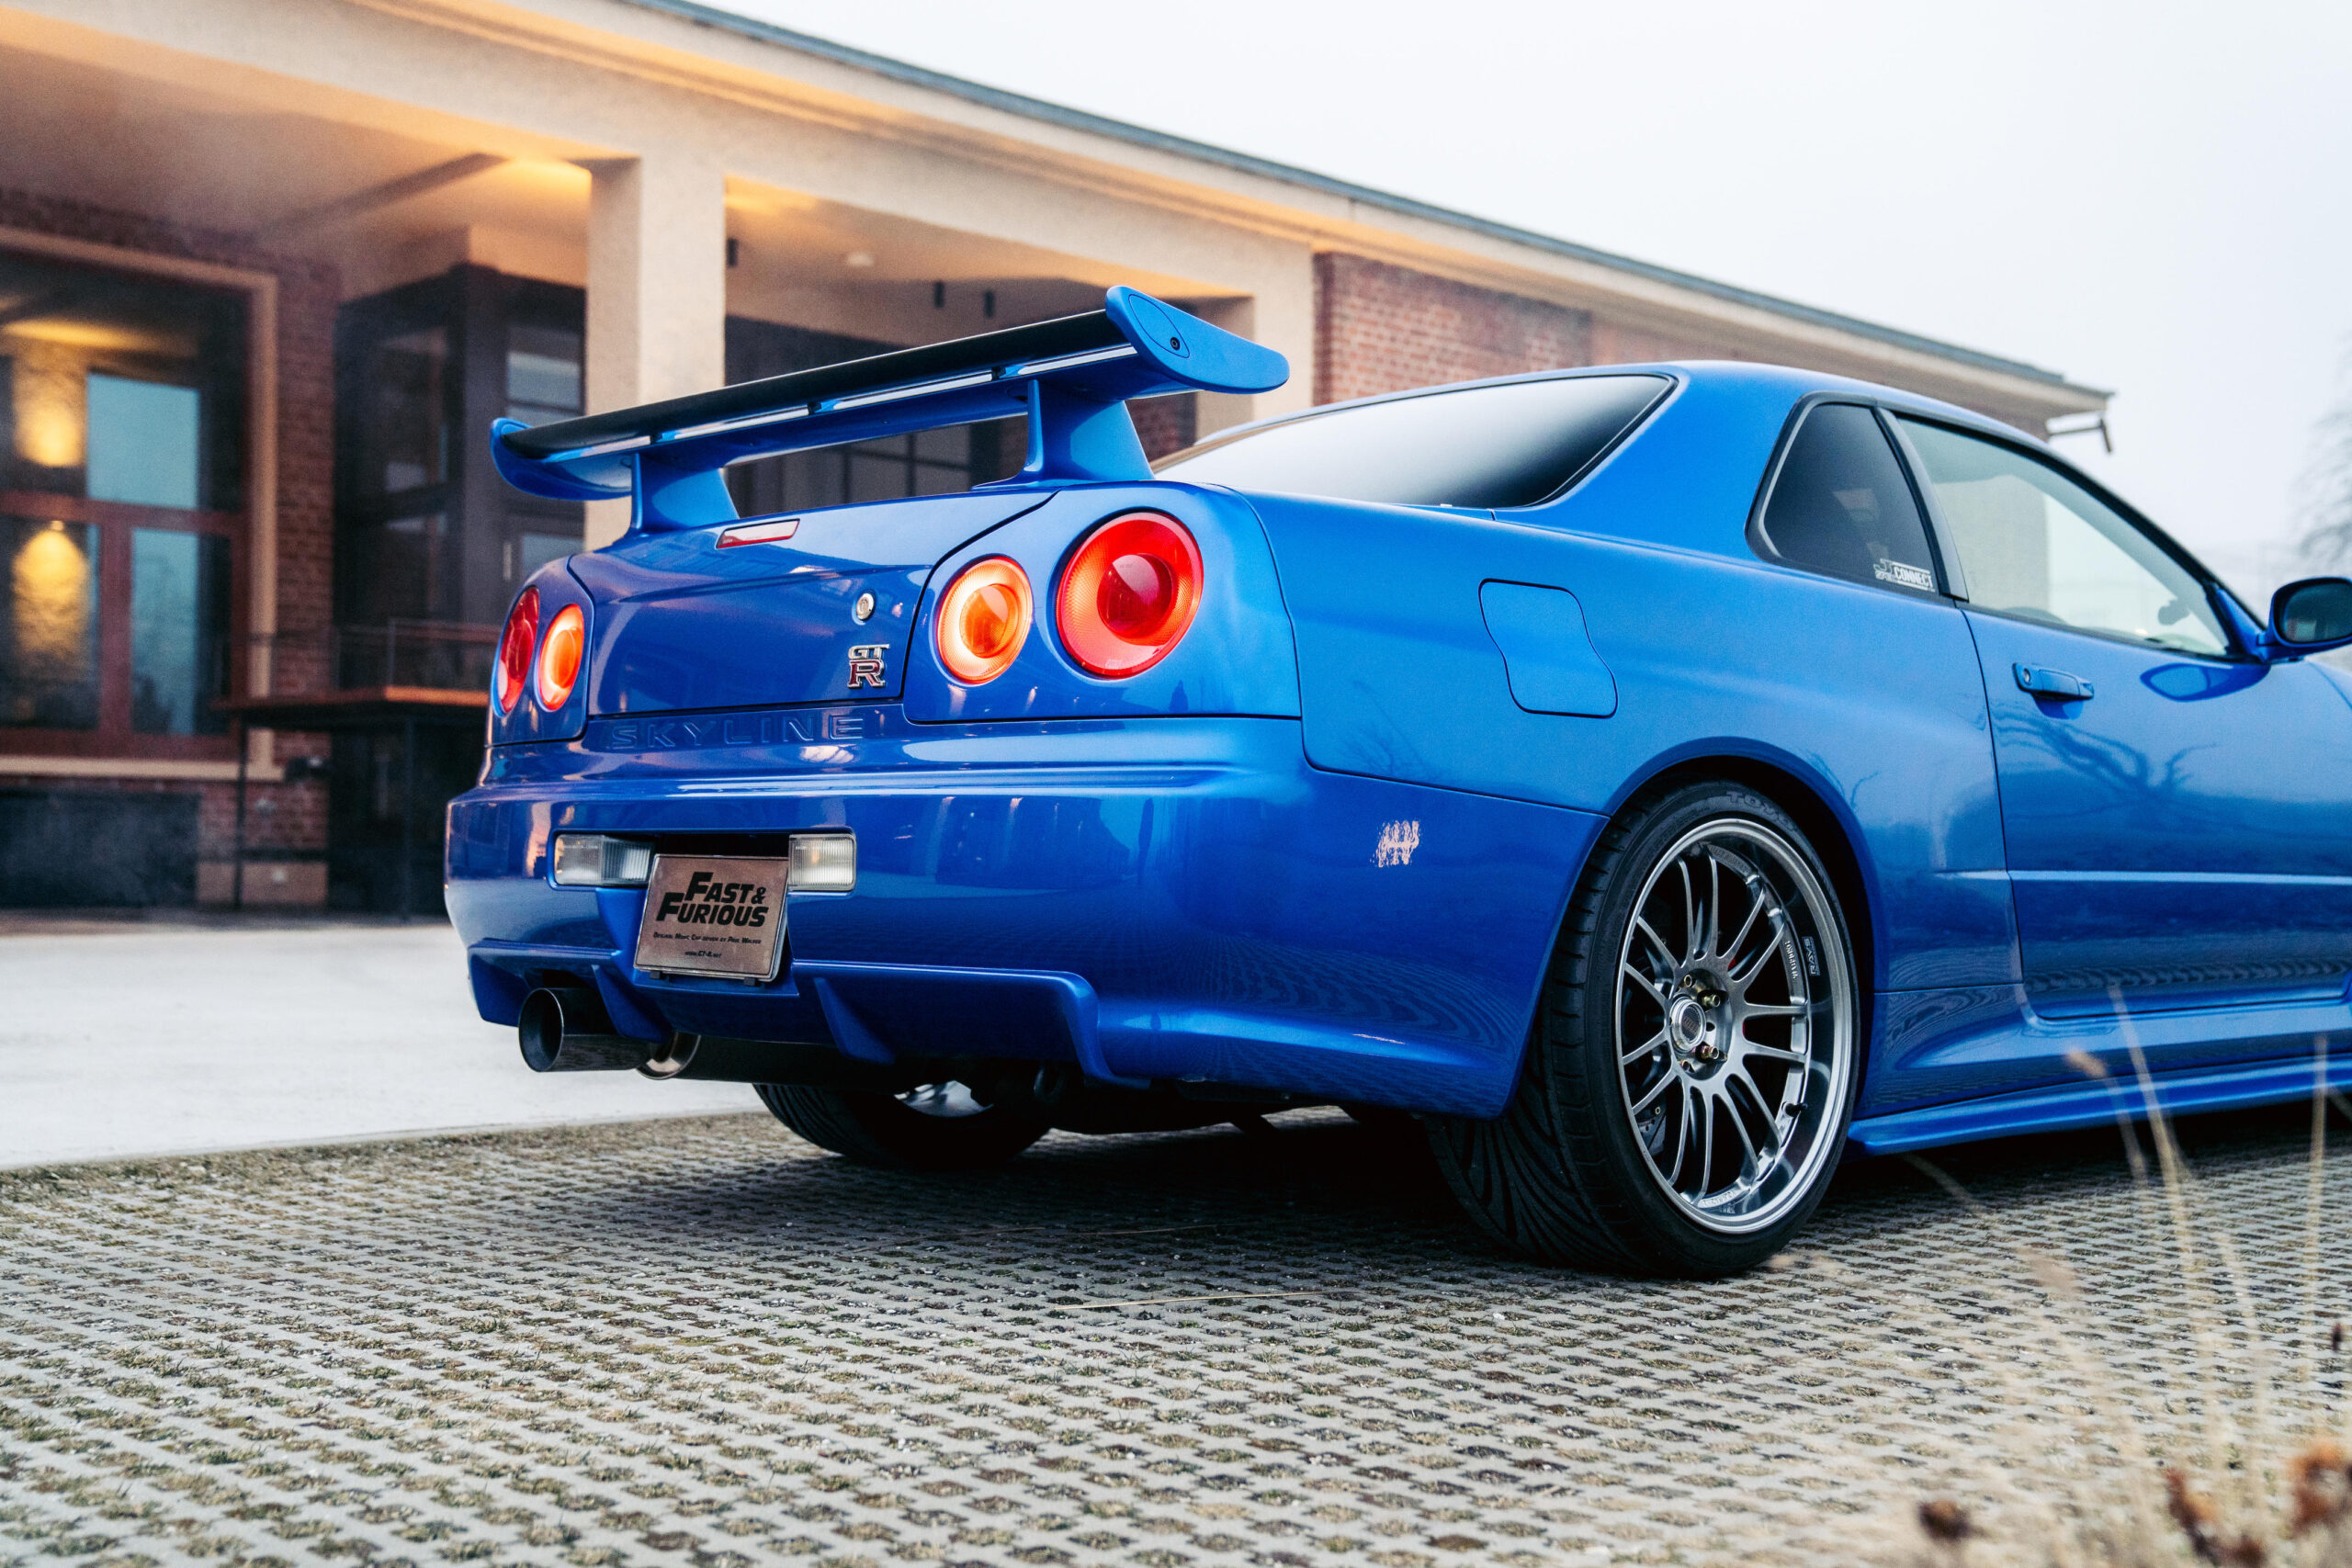 Buy This Nissan Skyline R34 Driven by Paul Walker in 'Fast and Furious 4